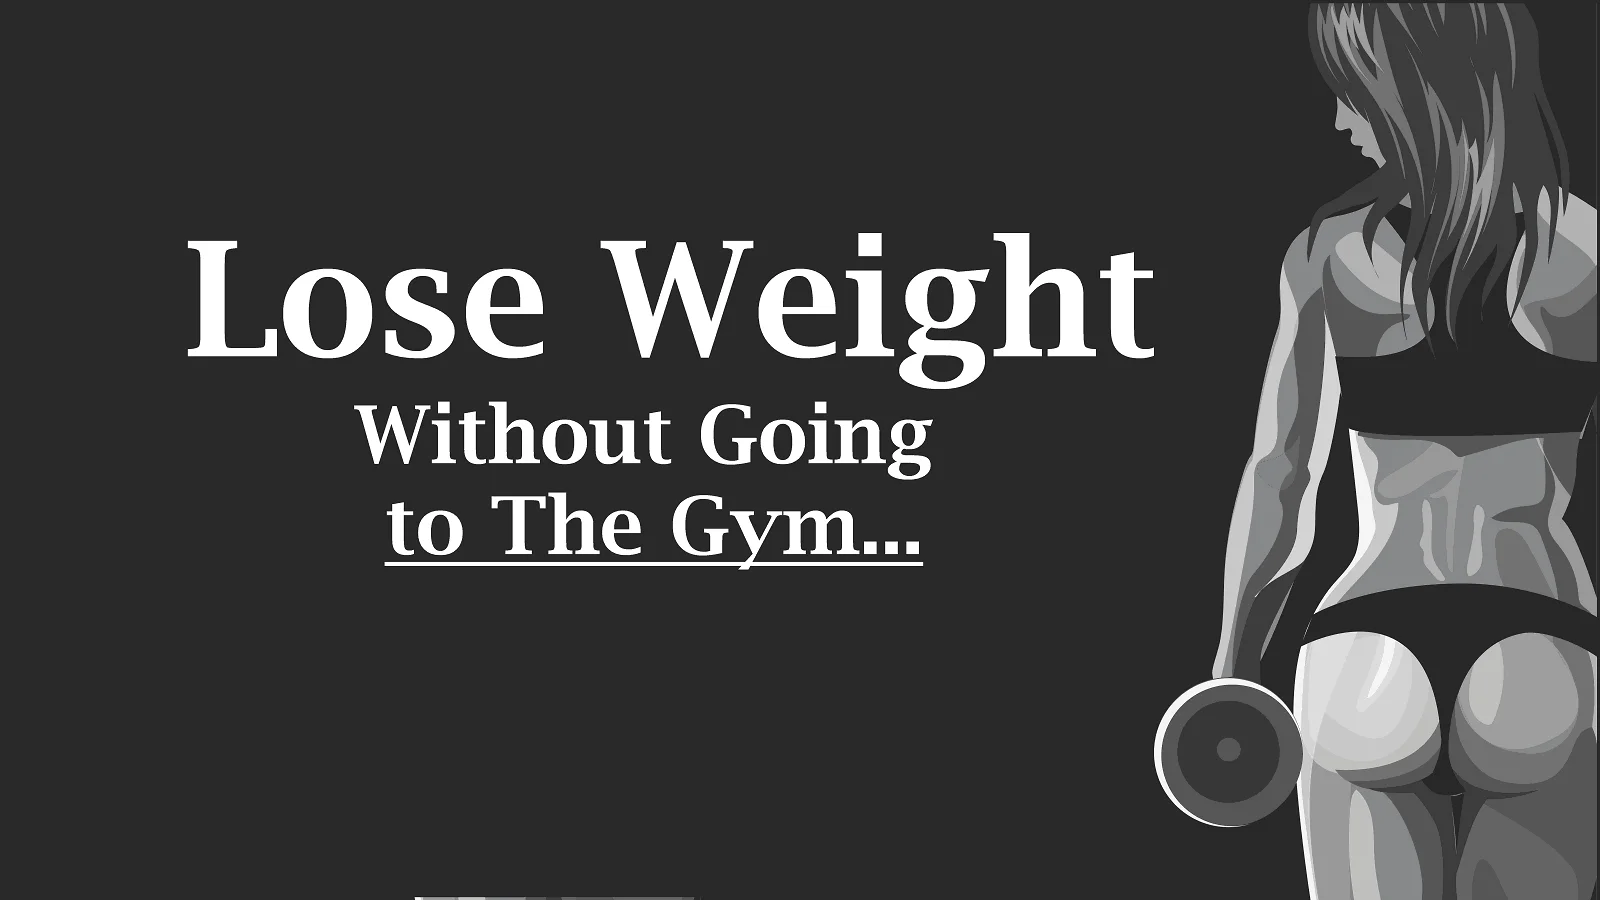 Lose Weight Gym. Sell bodied